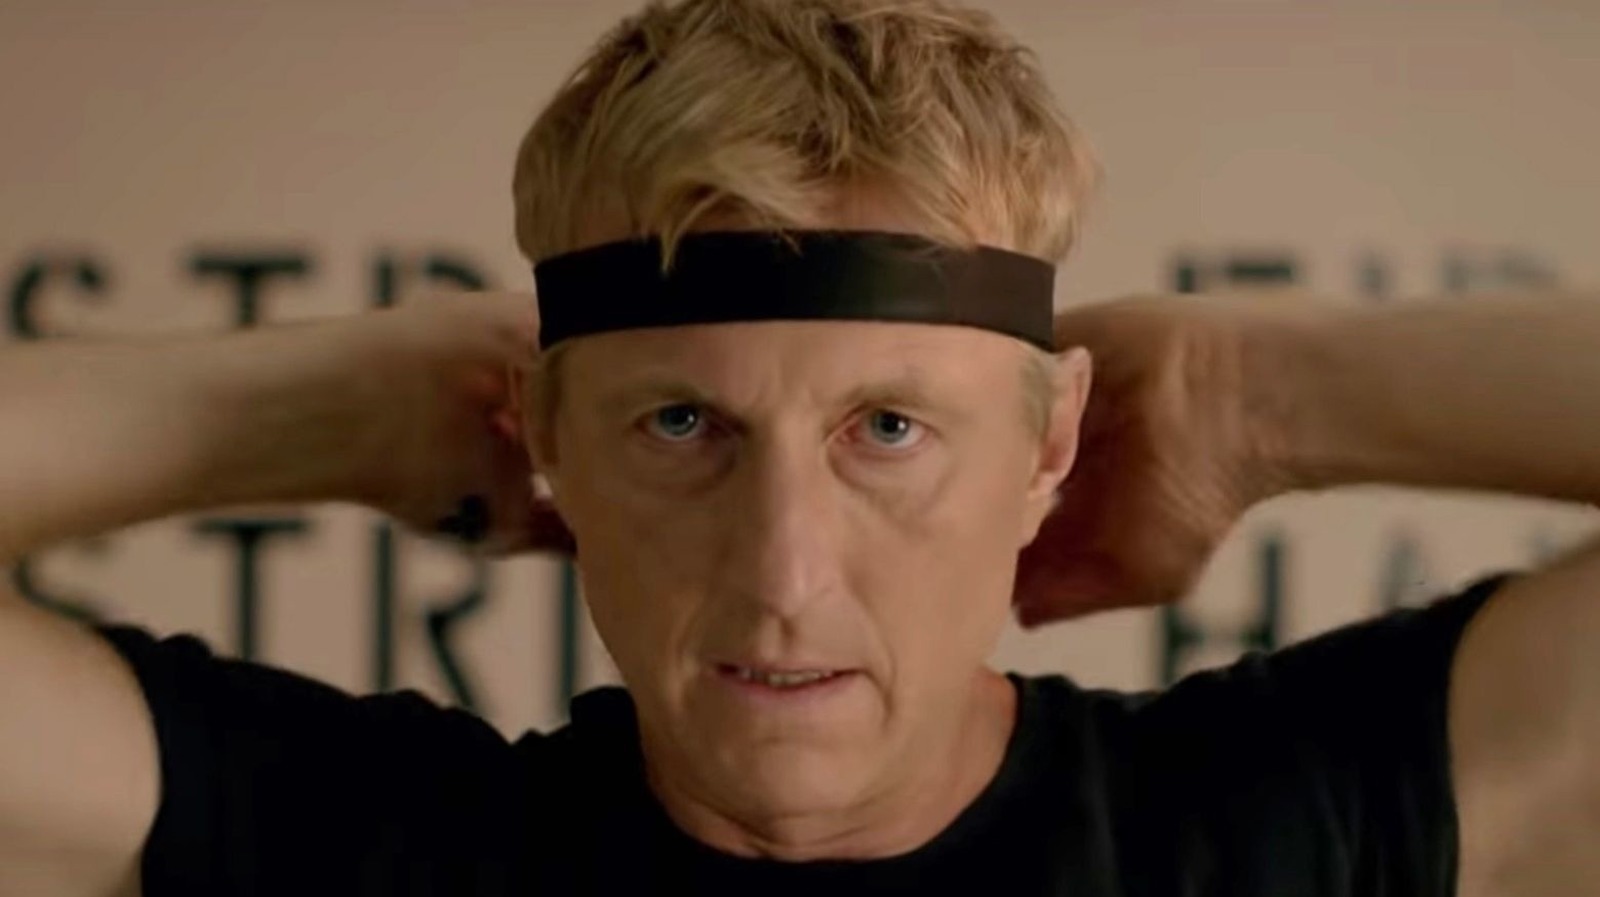 Just How Much Karate Do the Stars of 'Cobra Kai' Actually Know? - TheWrap